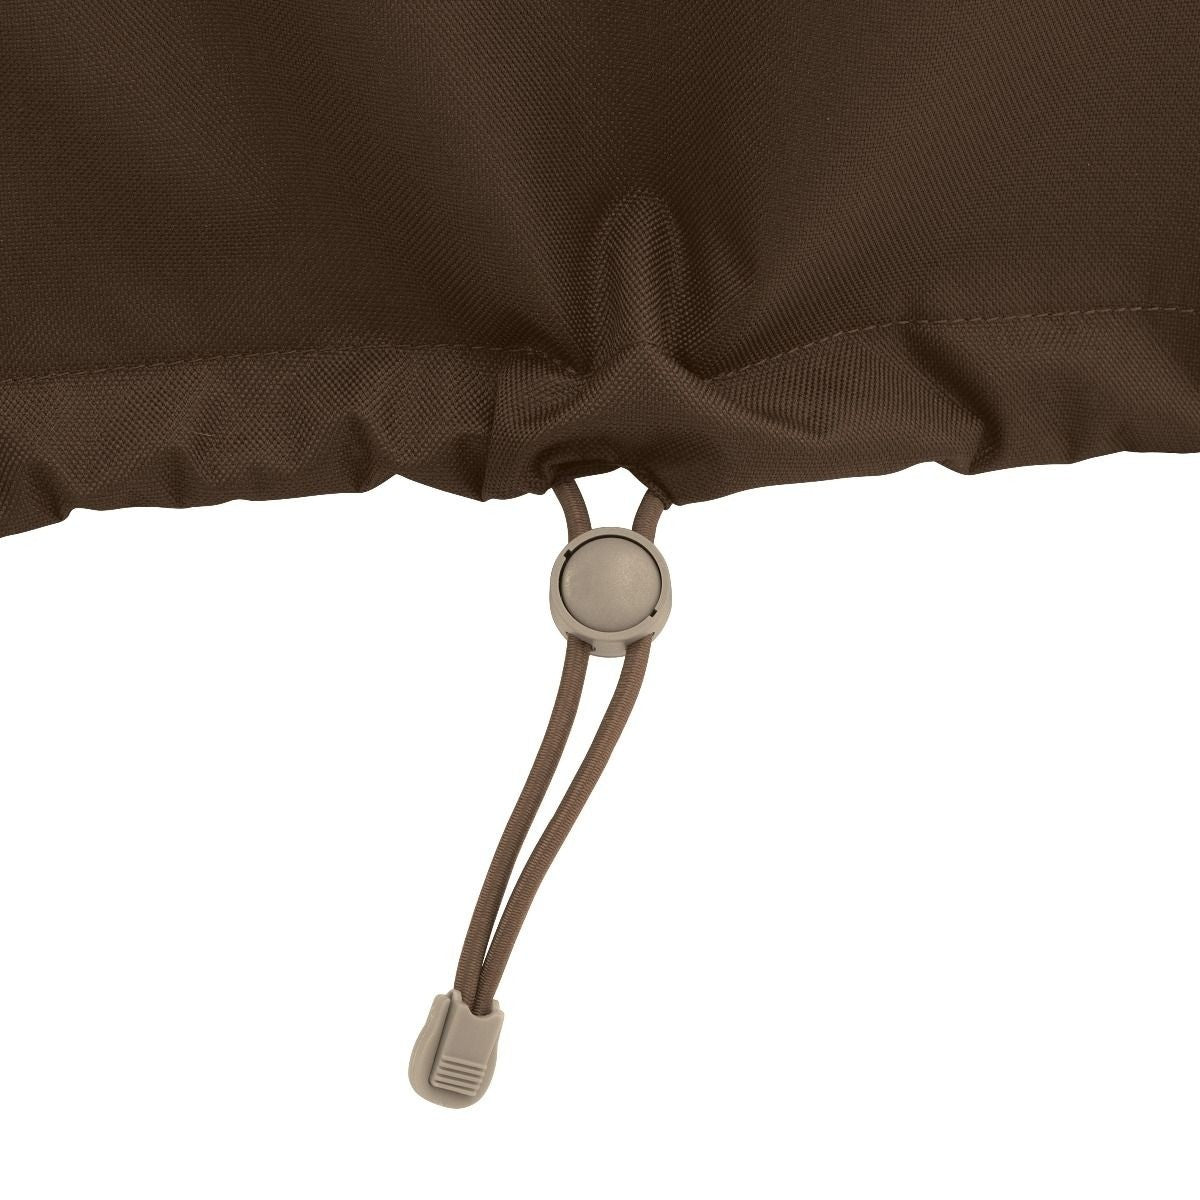 Bar Height Chair Rain Proof Outdoor Cover